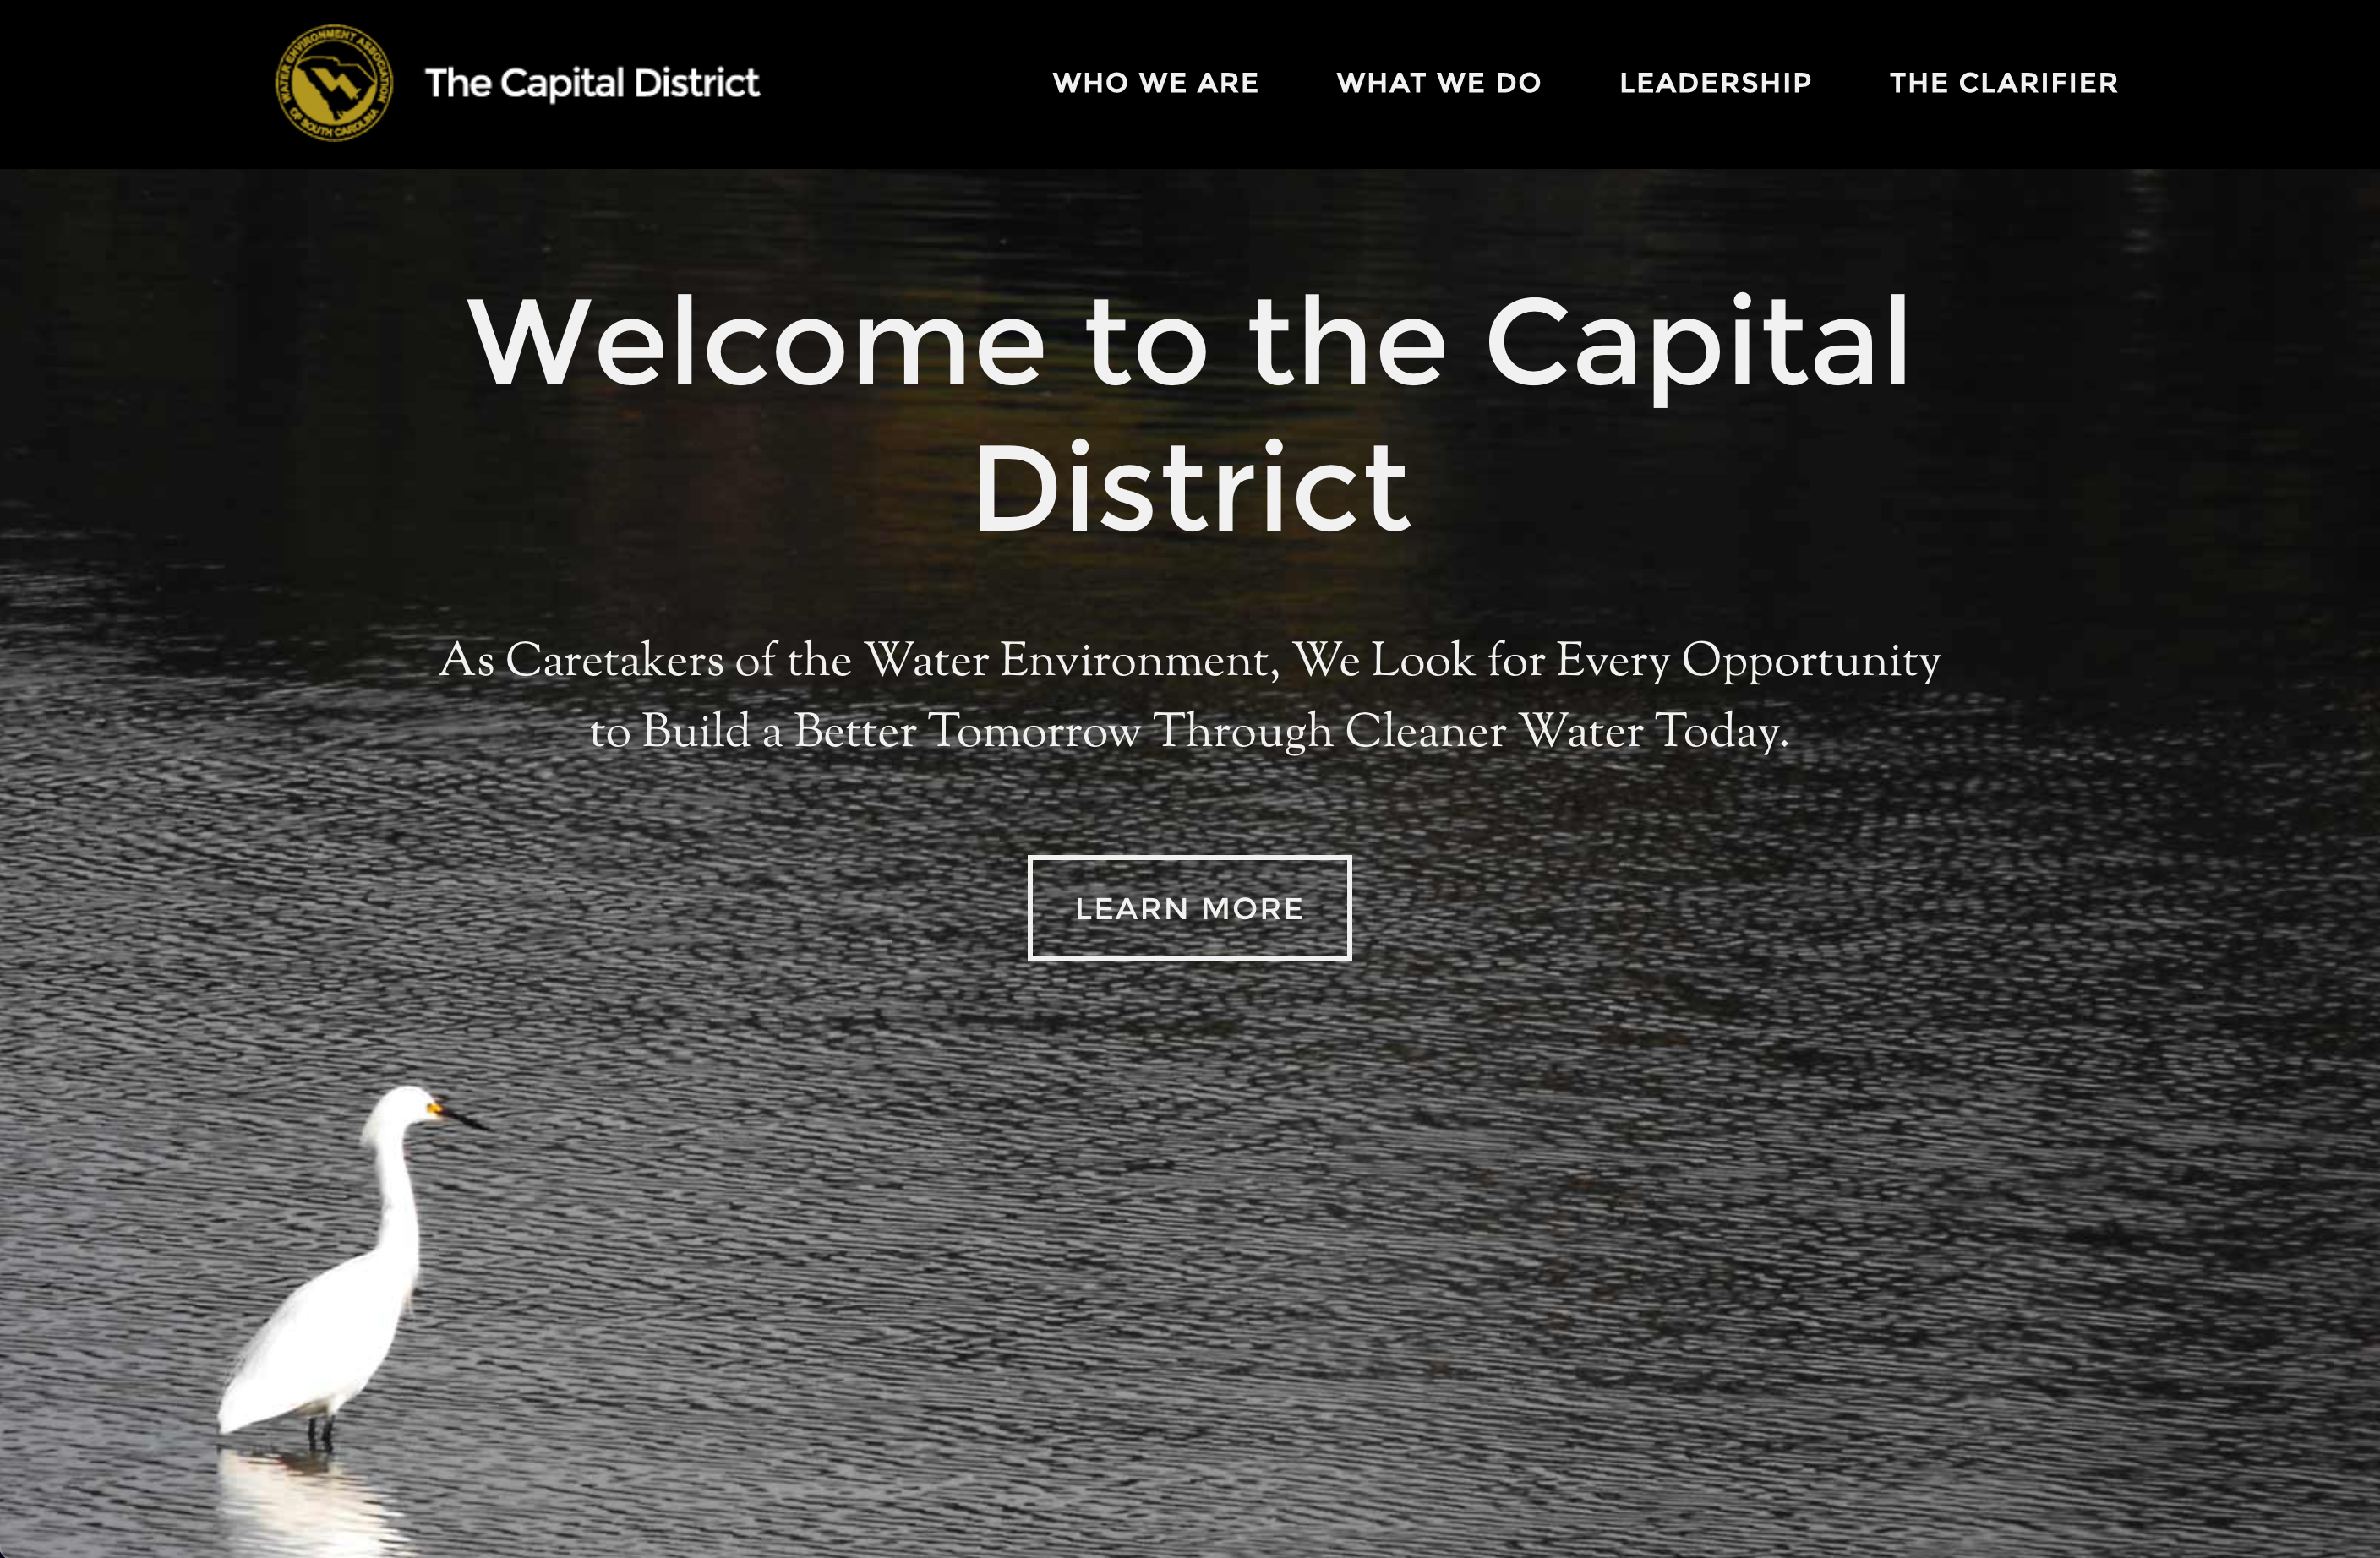 The Capital District